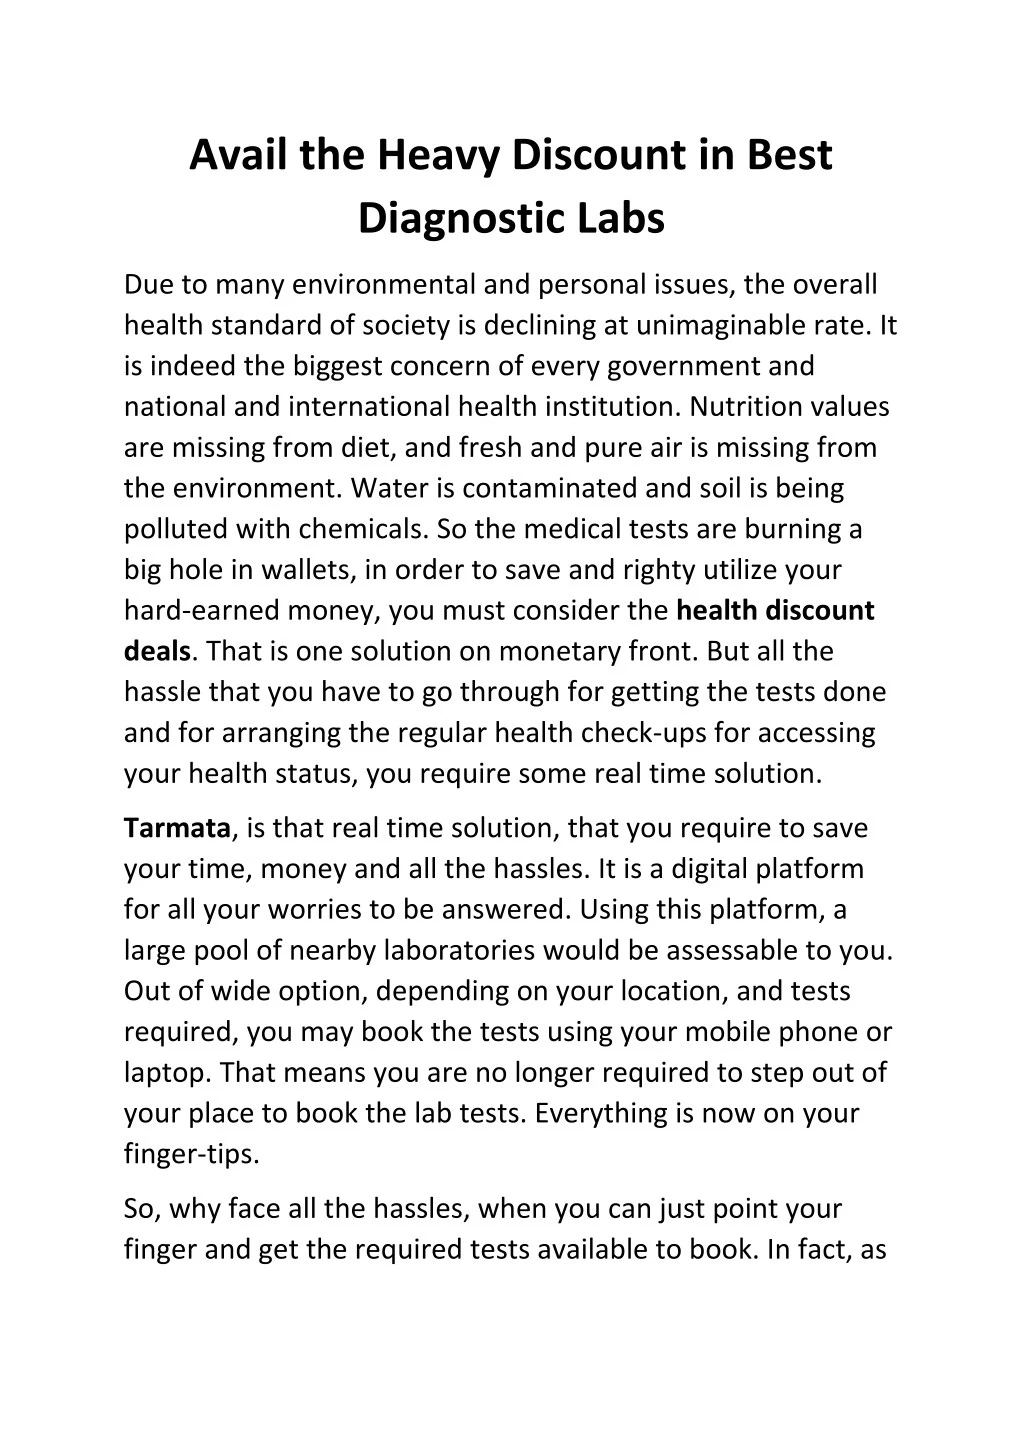 avail the heavy discount in best diagnostic labs